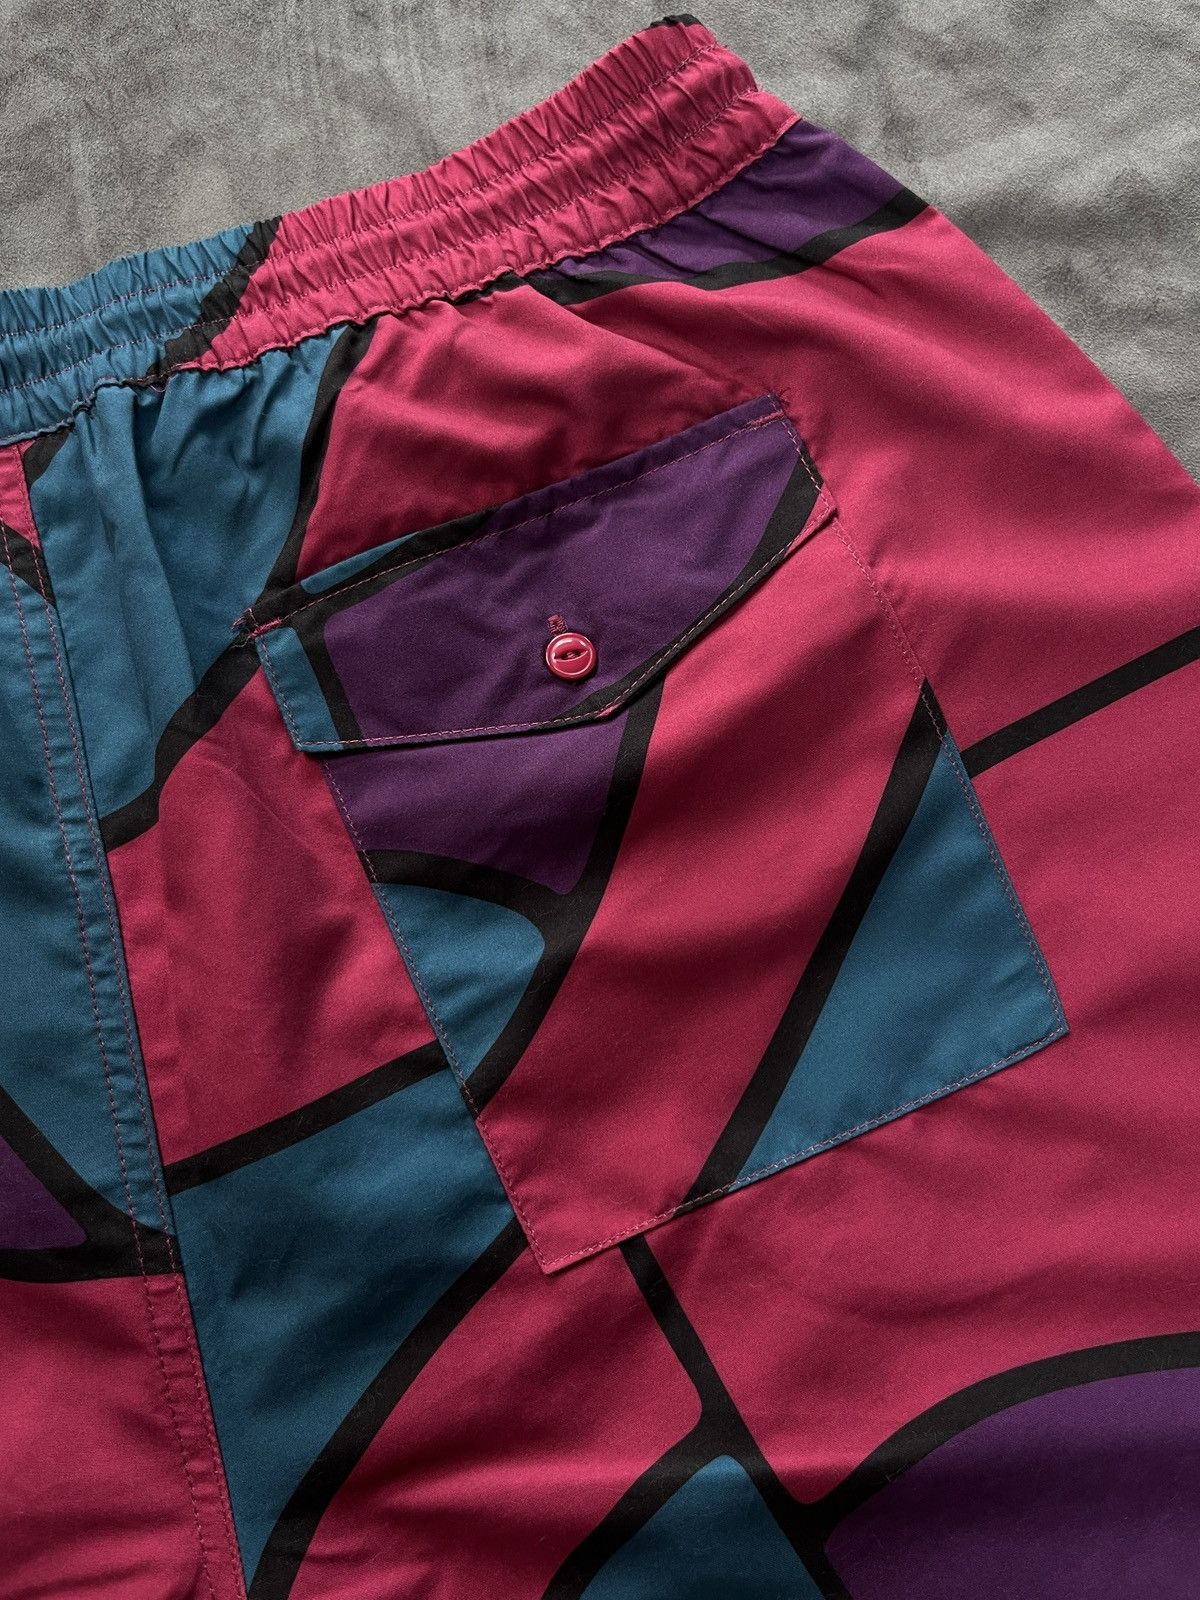 Hype - Deadstock By Parra Mountain Waves Shorts Multi Large - 10